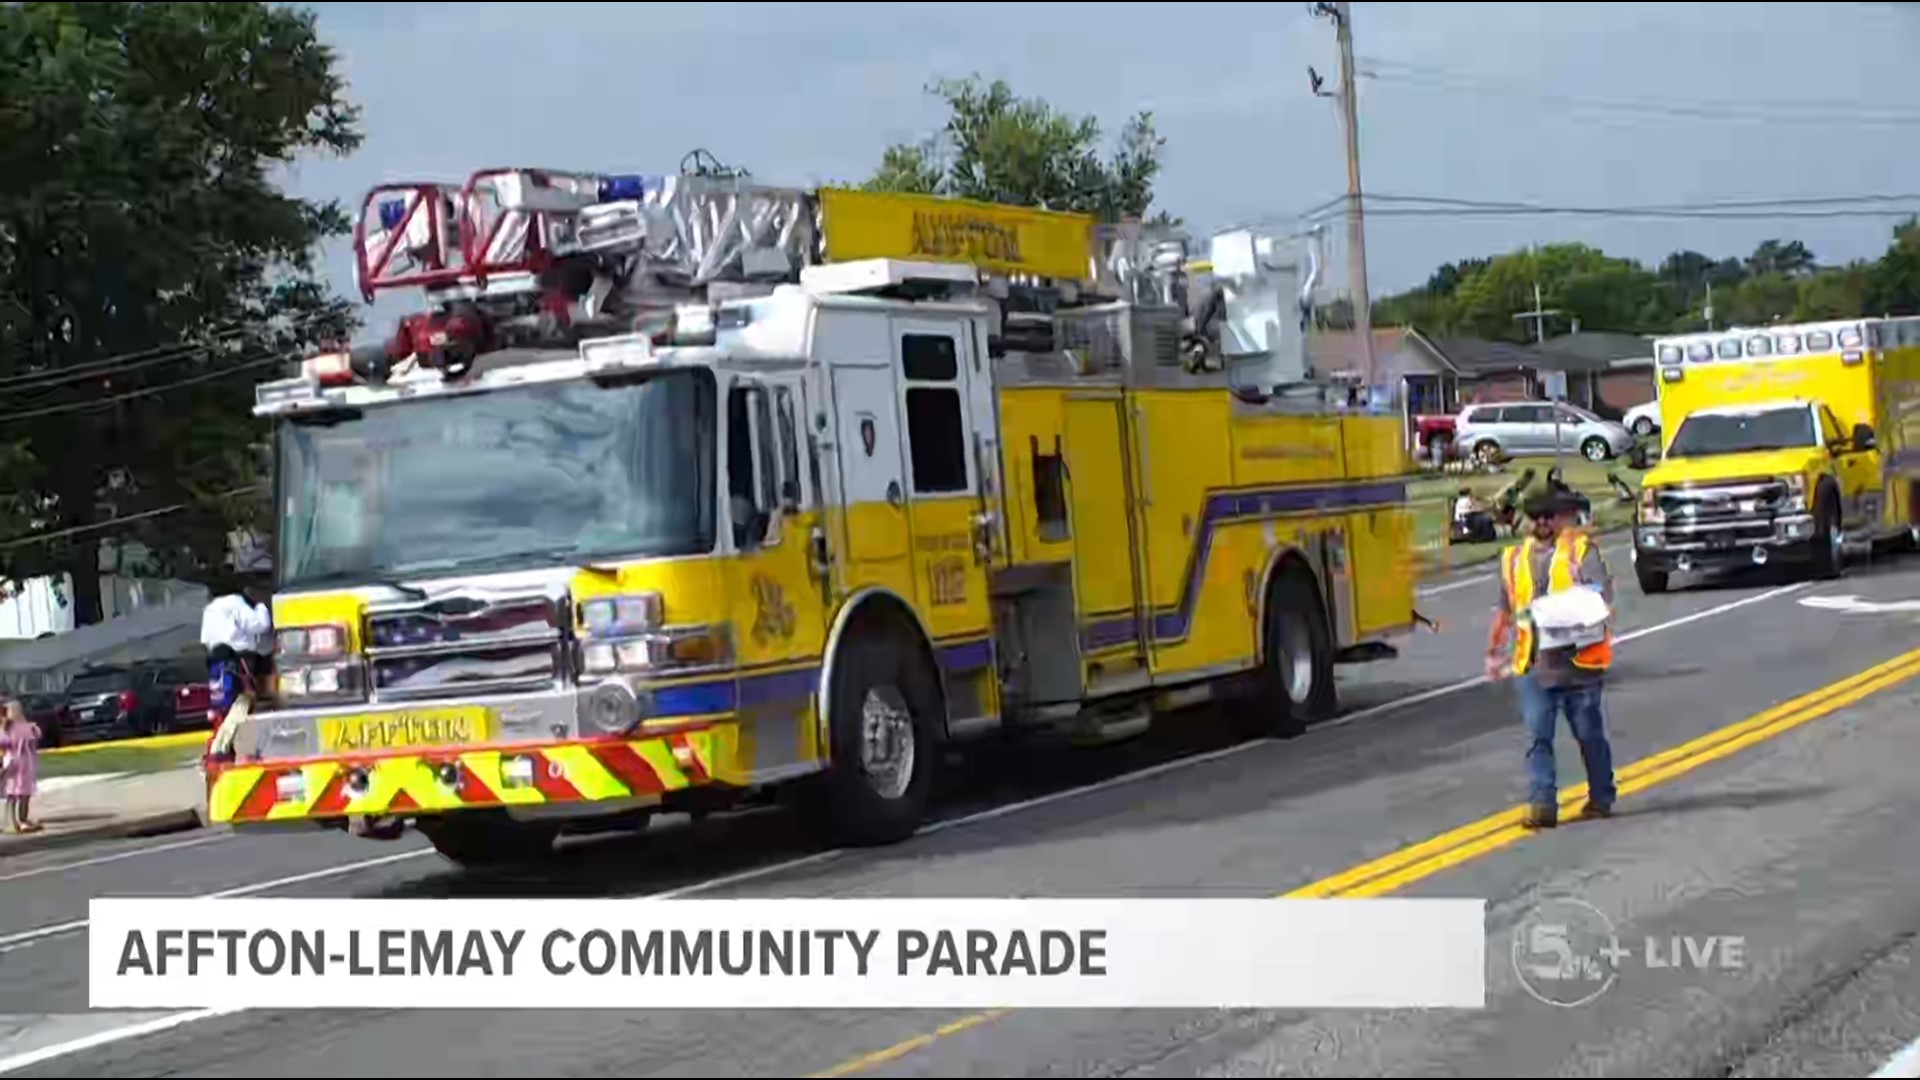 Replay: The Affton-Lemay Community Parade was on Sept. 16, 2023. Watch the 5 On Your Side Storm Tracker and the floats in the parade.